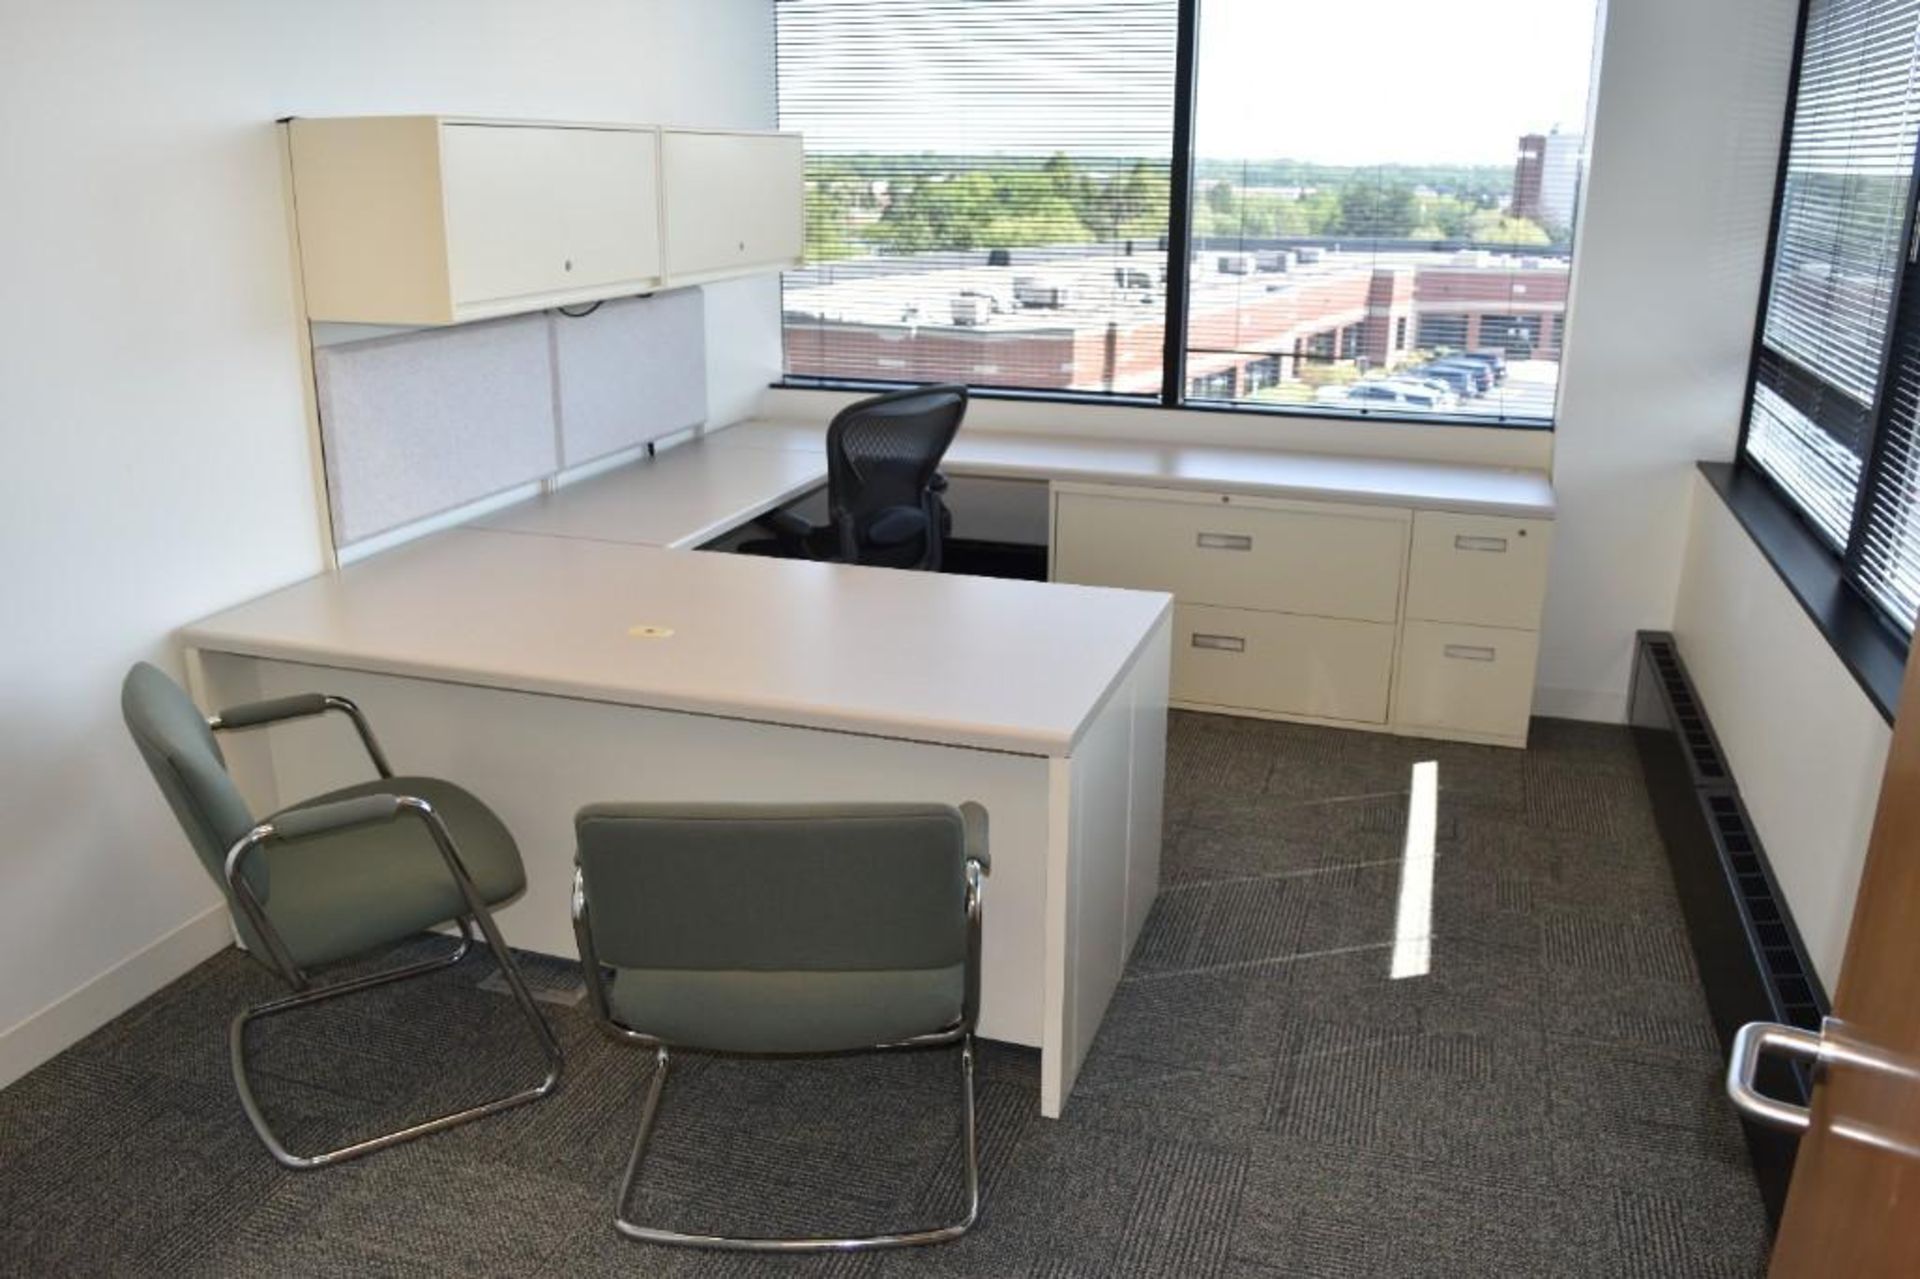 Lot c/o: (26) Assorted Office Suites - Relocated for ease of removal - Image 38 of 106